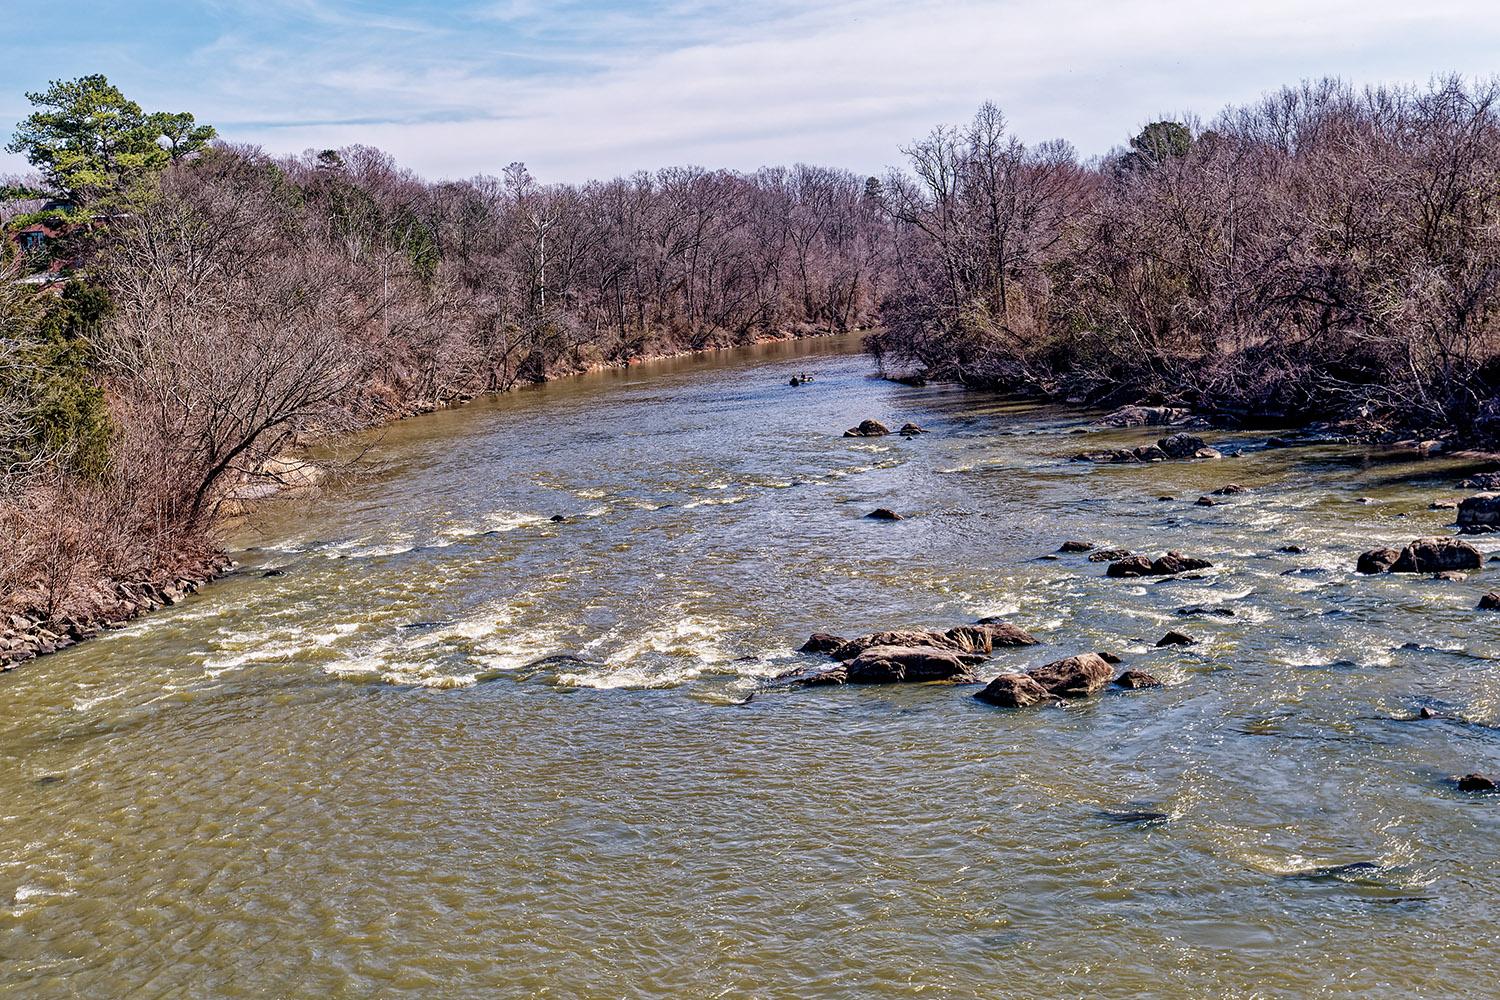 Looking from the bridge eastward  along the Haw River